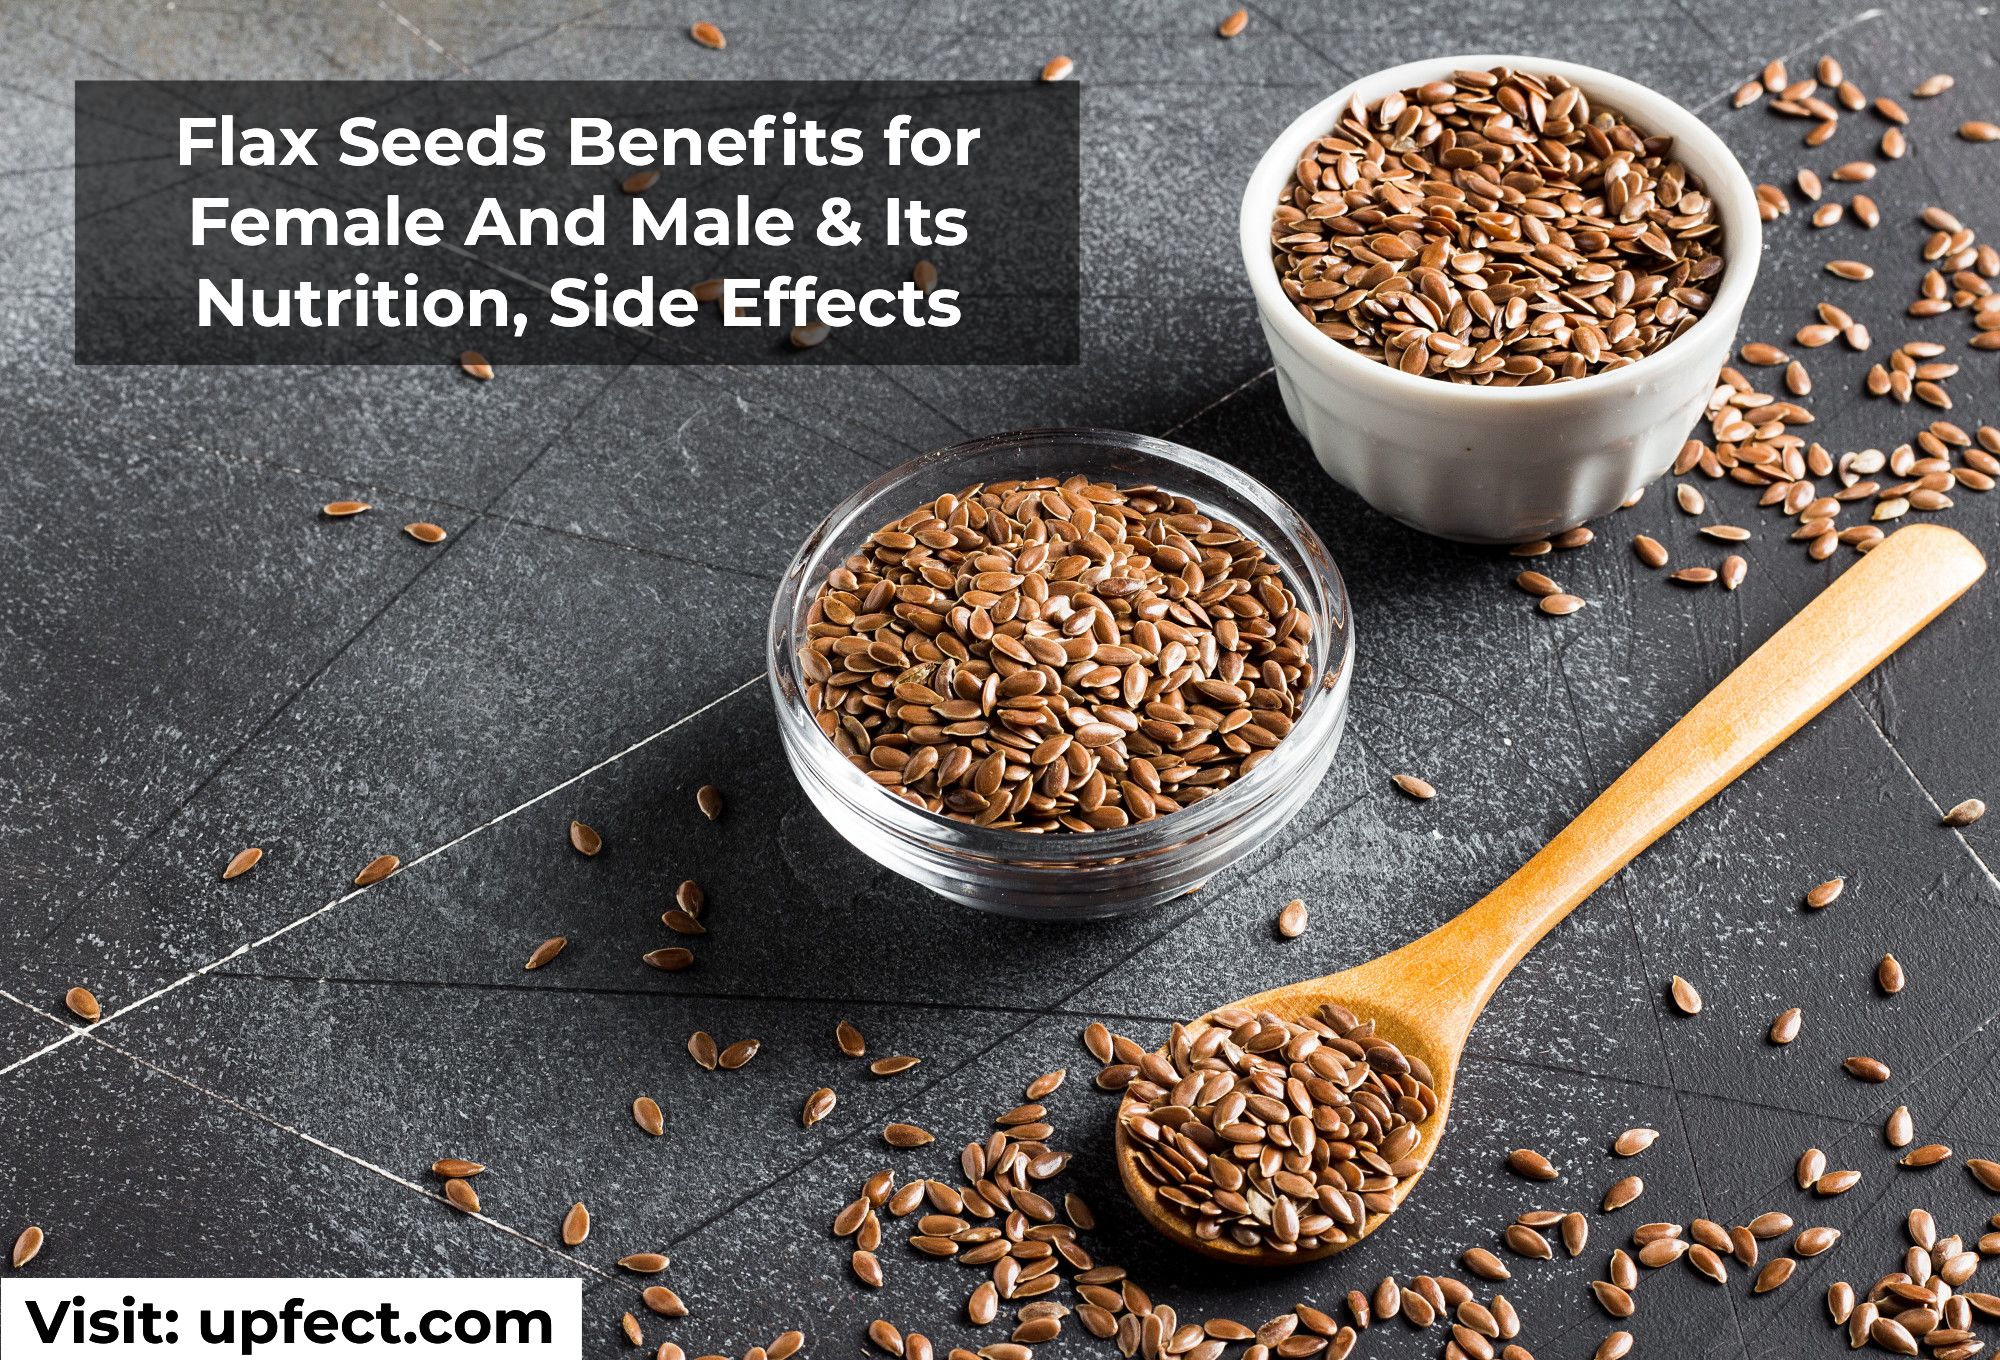 Flax Seeds Benefits for Female